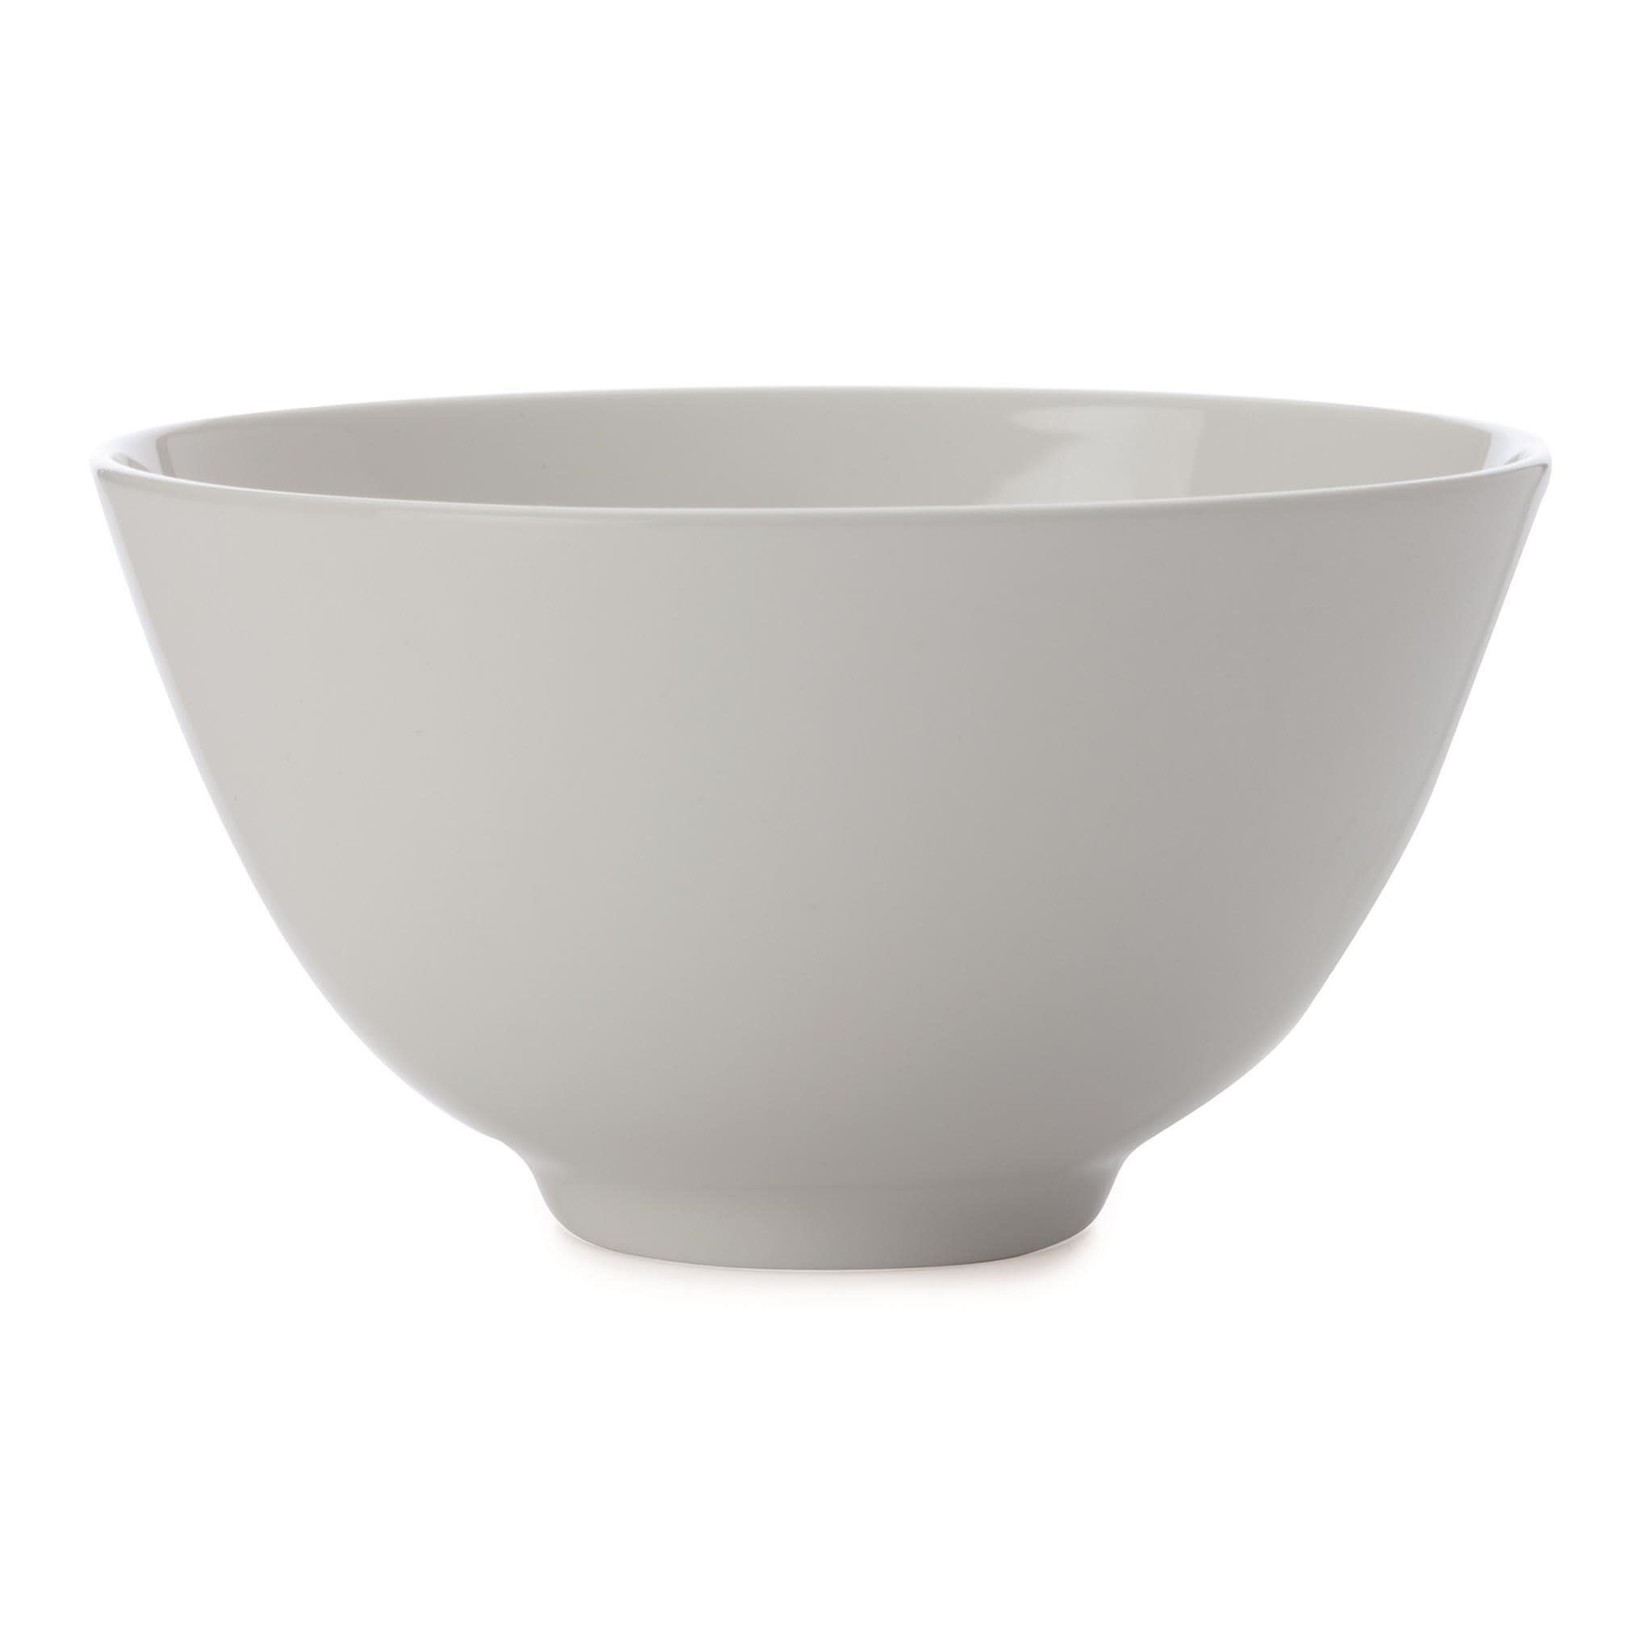 MAXWELL WILLIAMS MAXWELL WILLIAMS Noodle Bowl 20cm